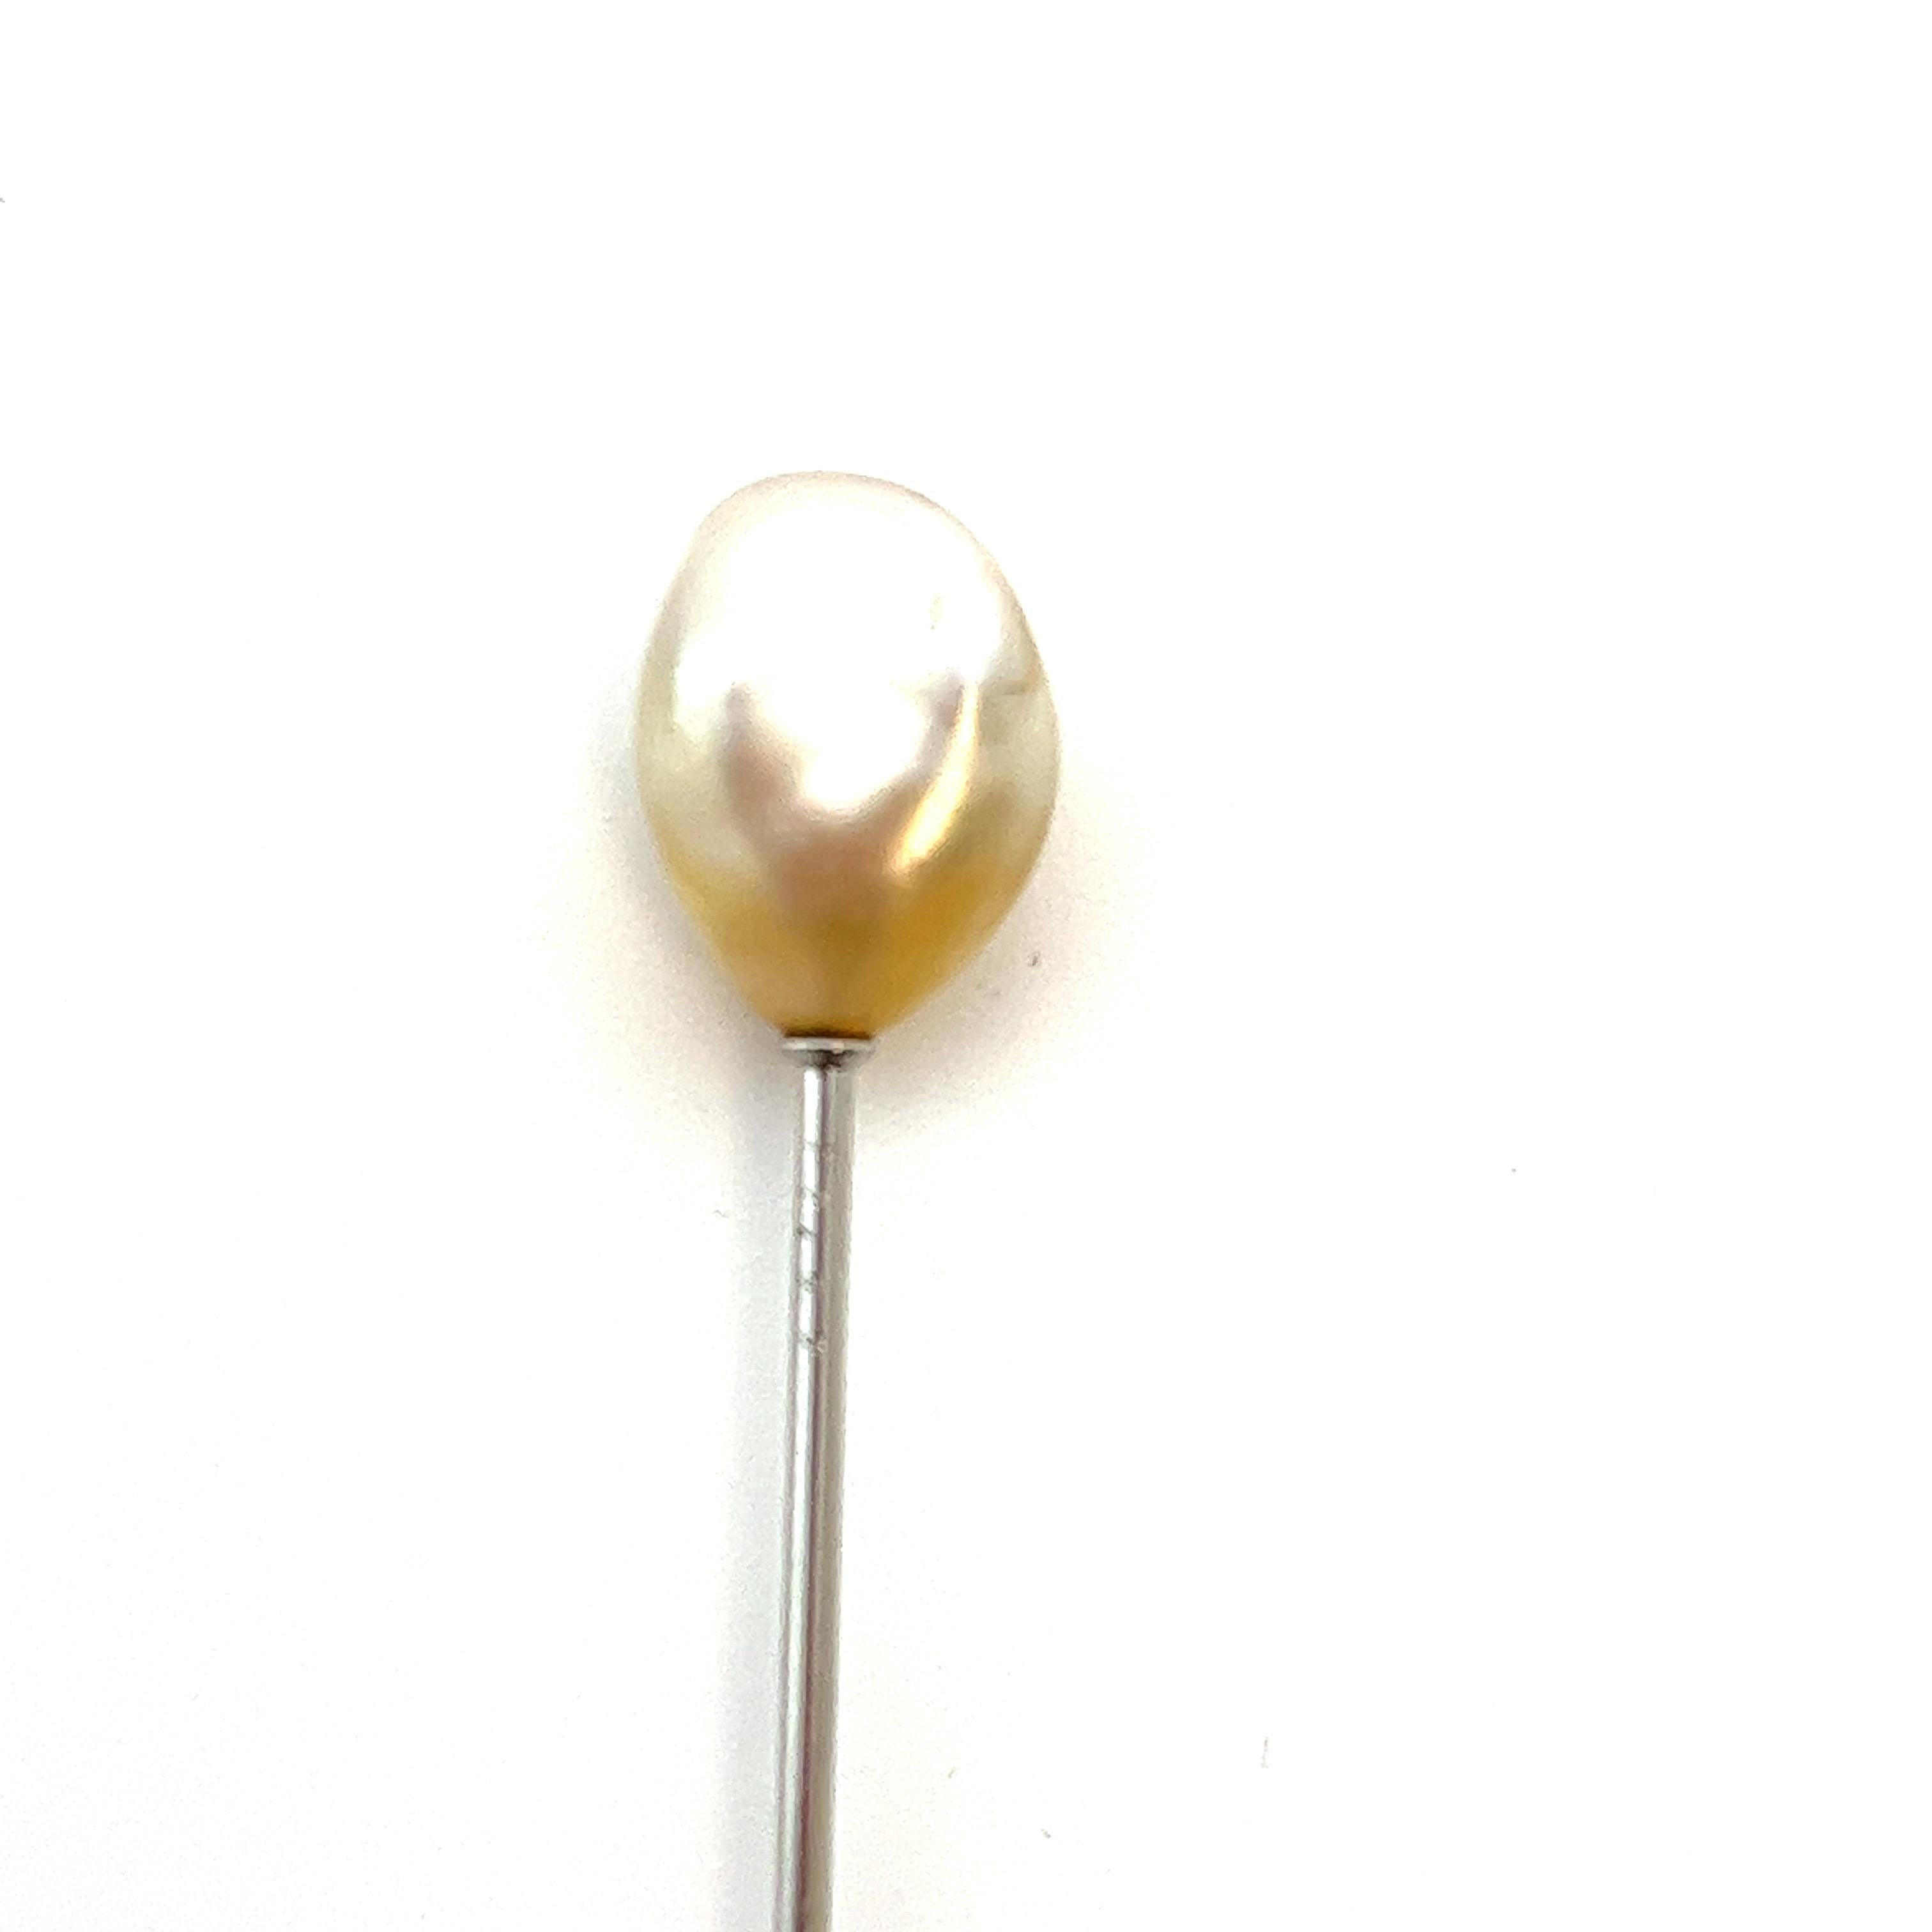 Bead Art Deco Platinum Stick Pin with Natural Pearl - Late 19th Century Elegance For Sale